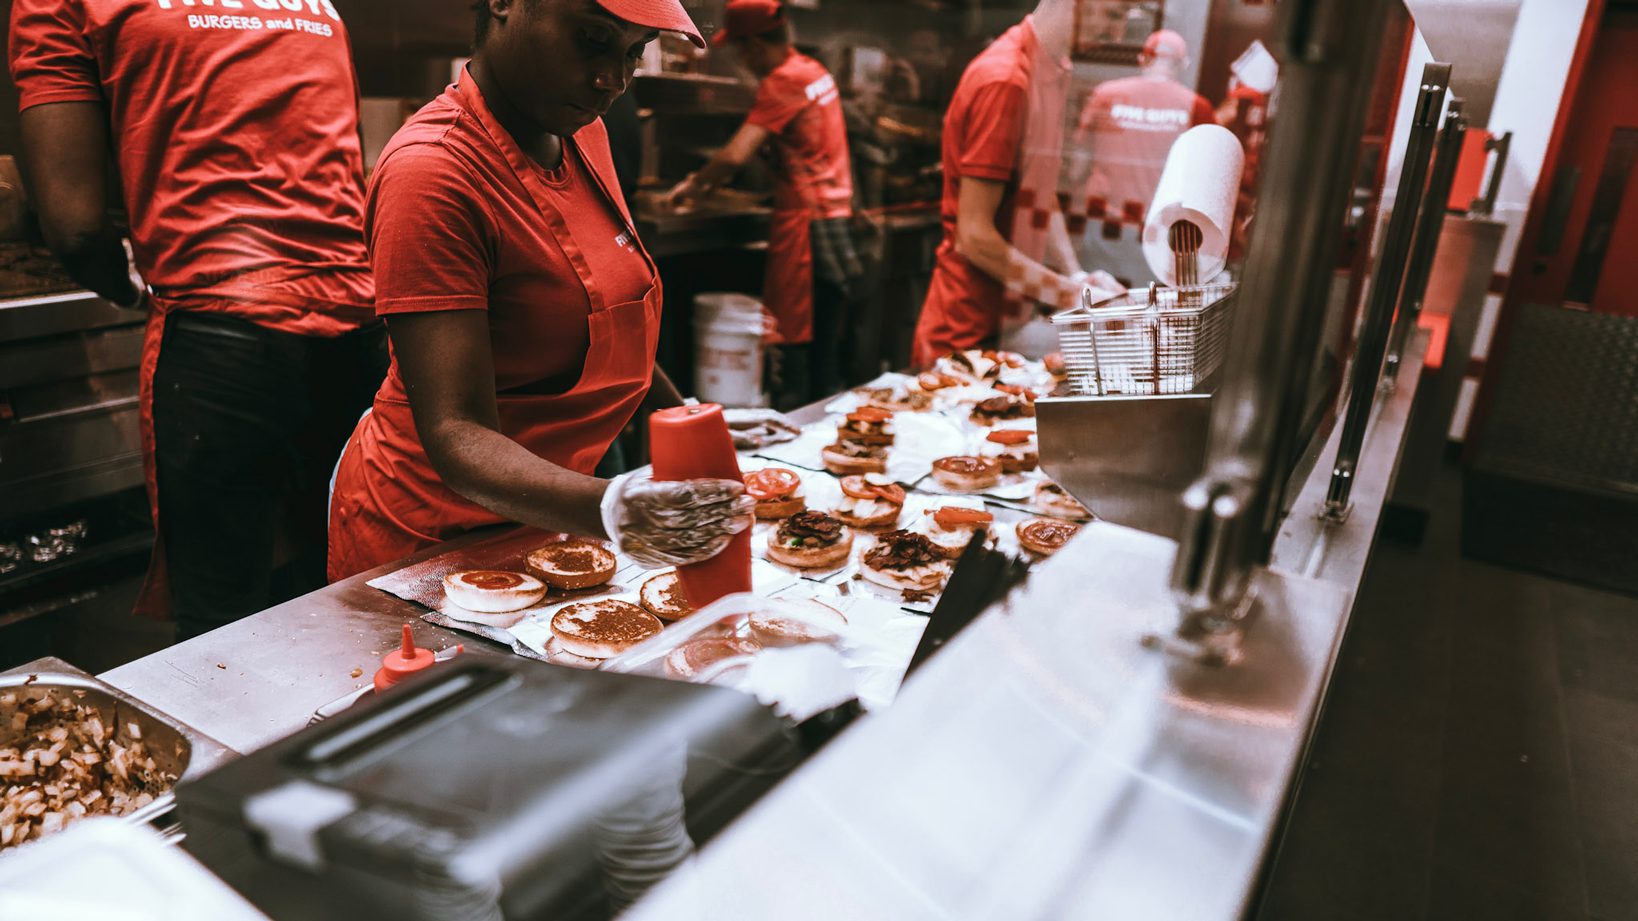 five guys staff member putting ketchup on burgers